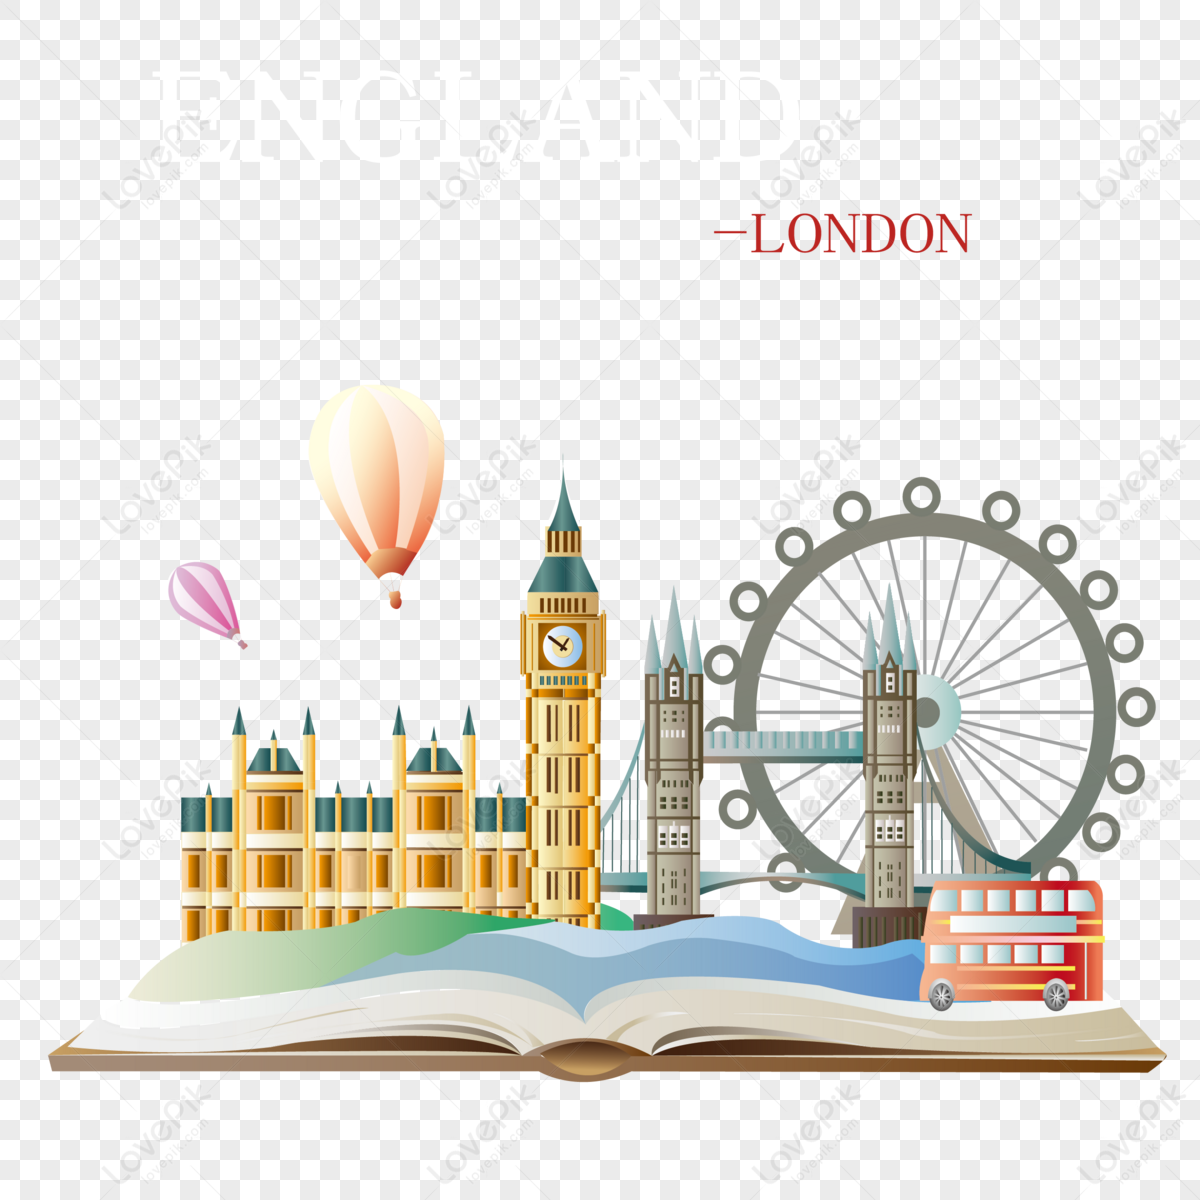 Travel to London Architecture Travel to London Eye Bus Element Vector png image